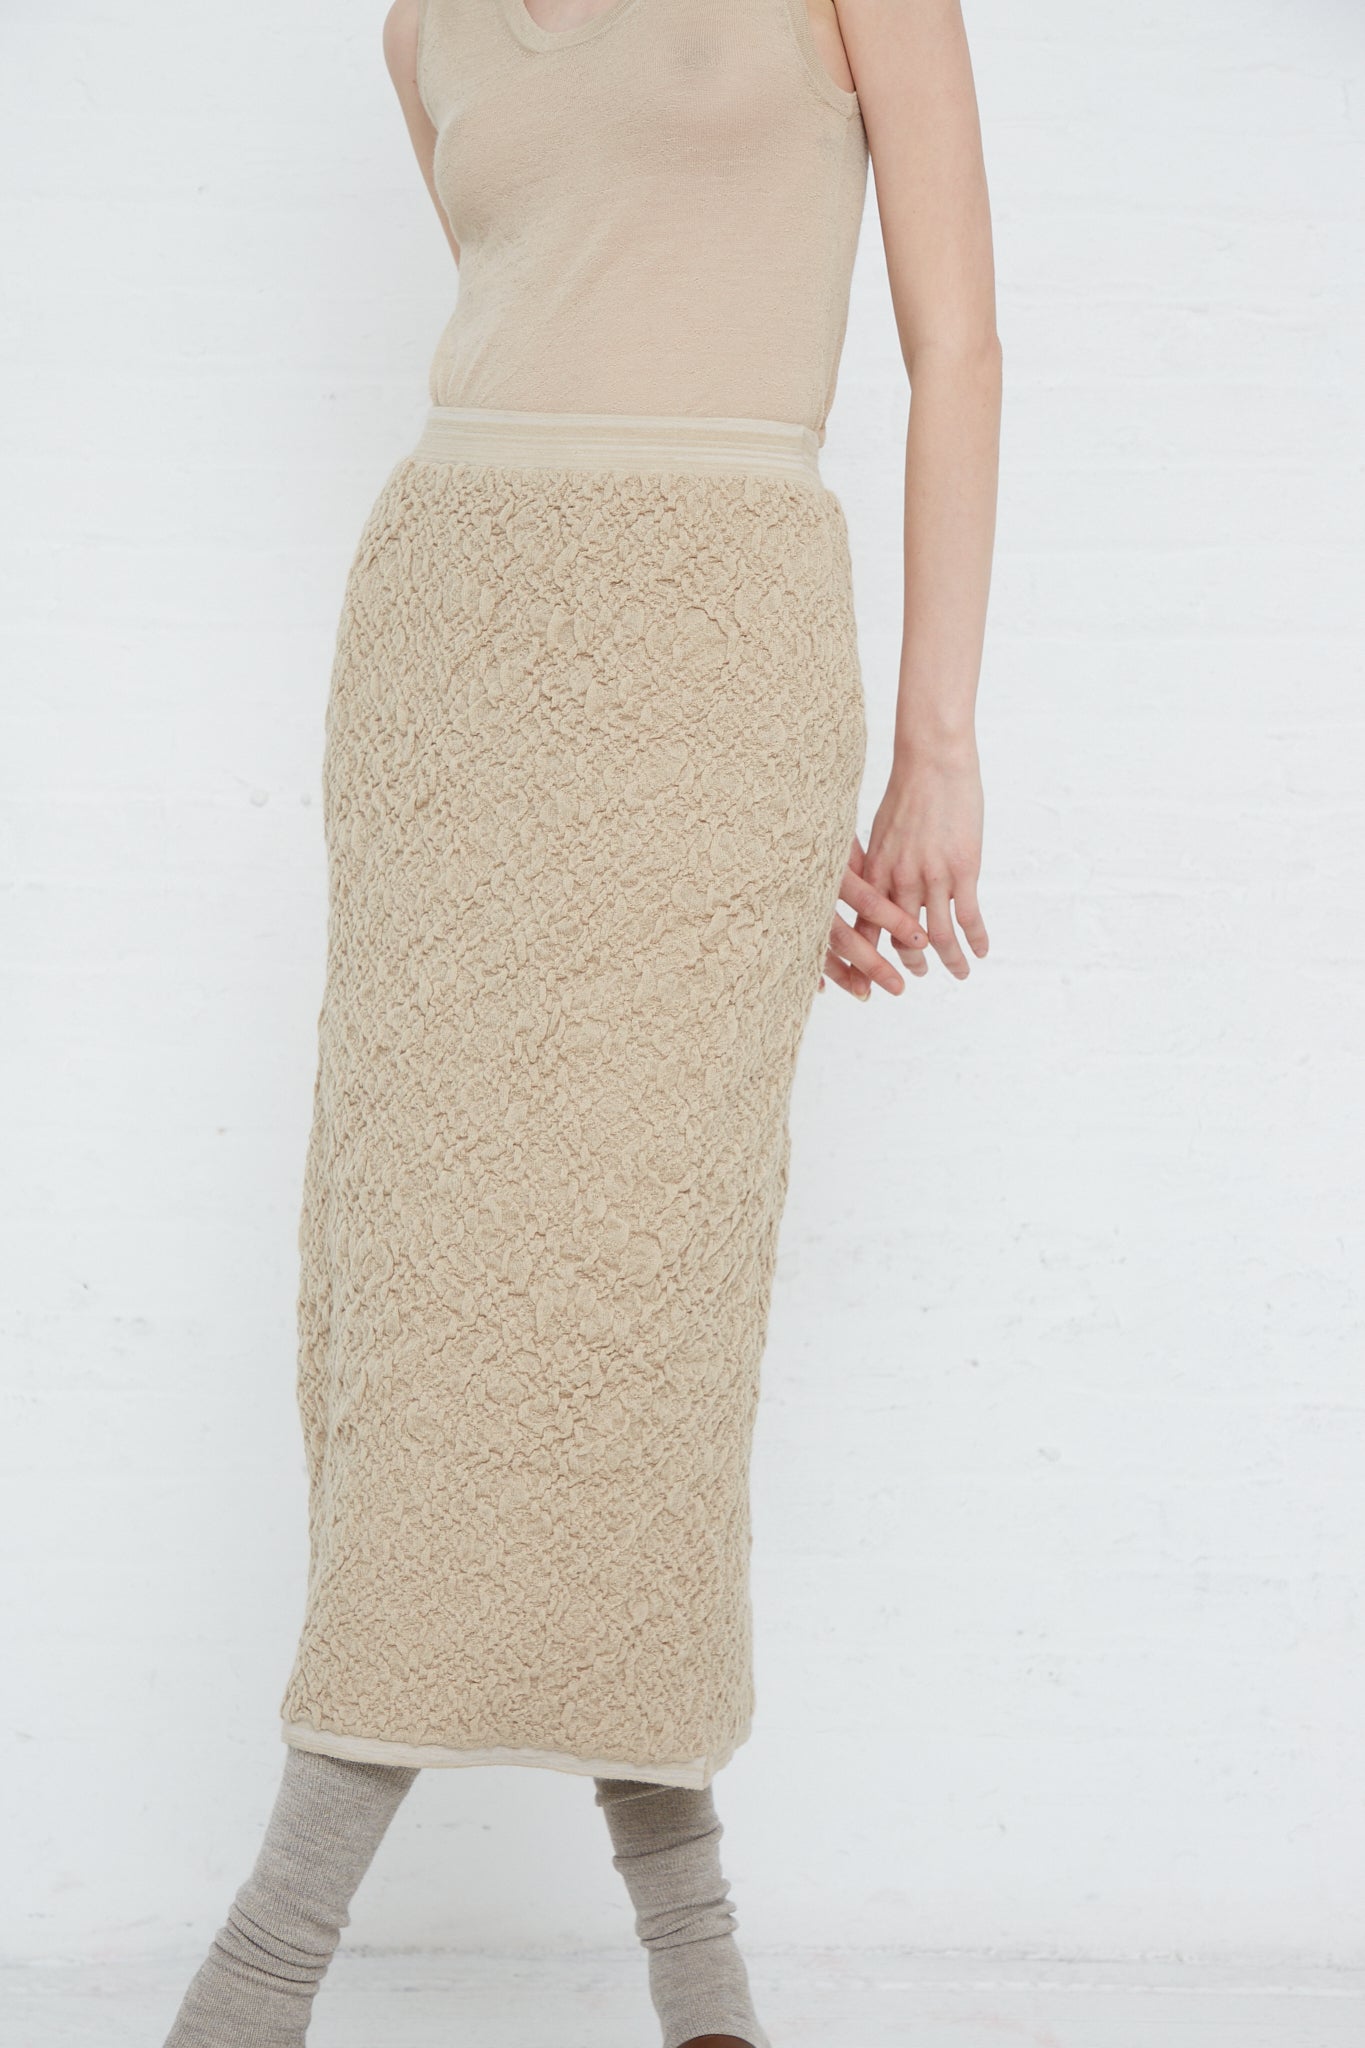 A woman wearing a Baby Alpaca Gauze Skirt in Antique by Lauren Manoogian. Front view and full length view.